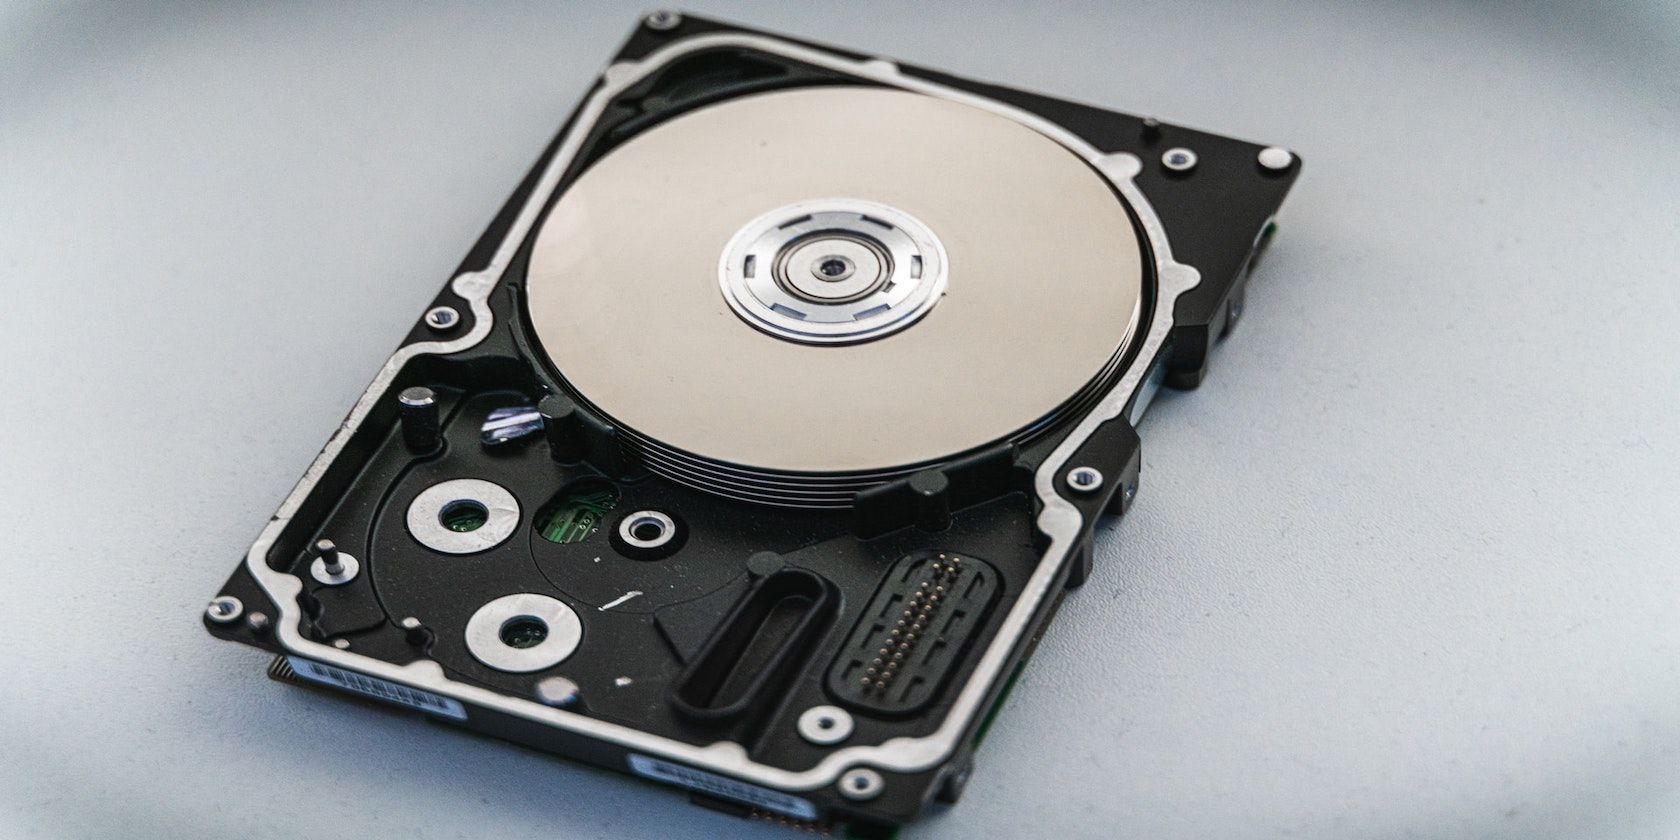 How to Check Disk Usage on Linux With duf